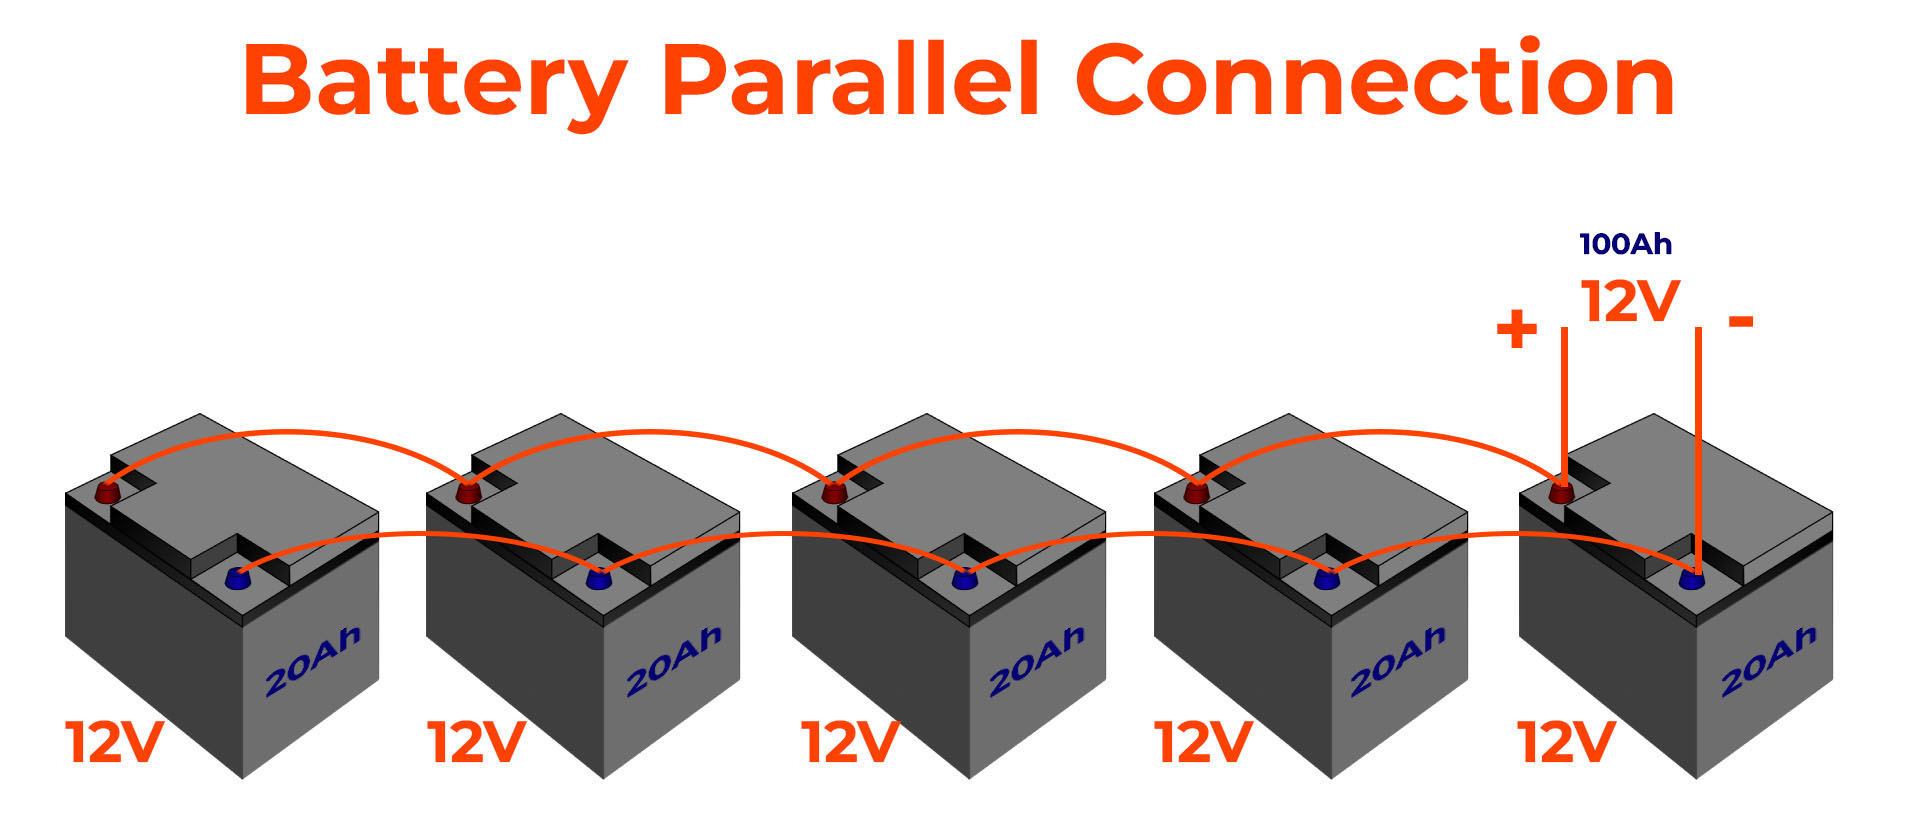 Batteries in Parallel Connection